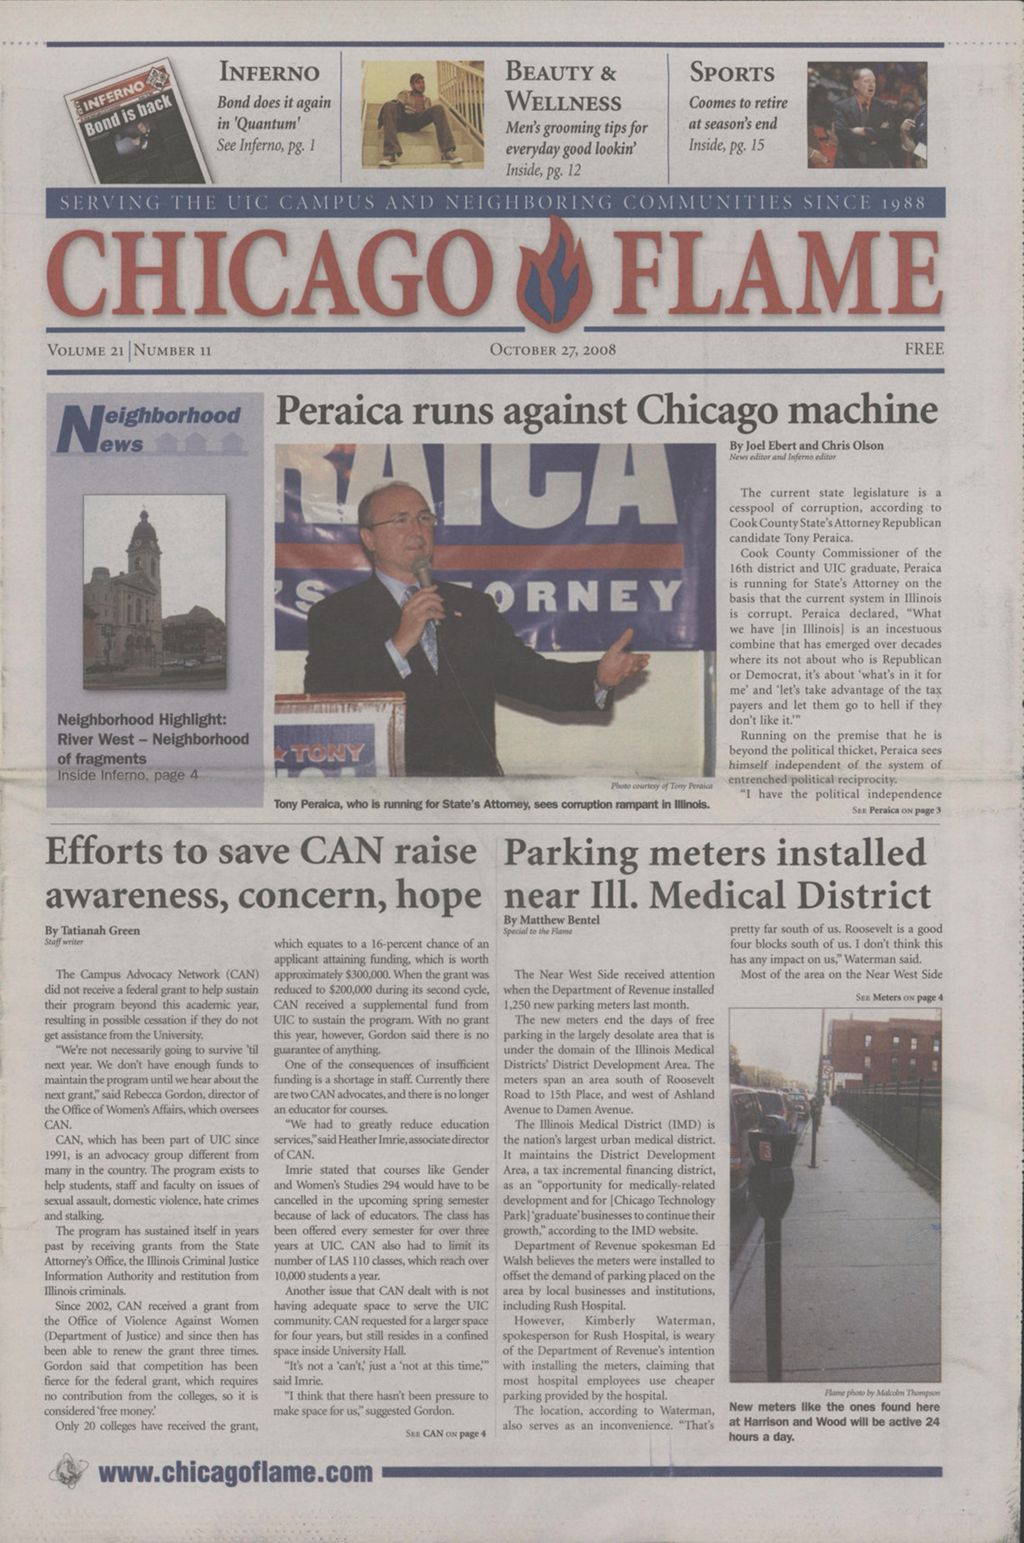 Chicago Flame (October 27, 2008)